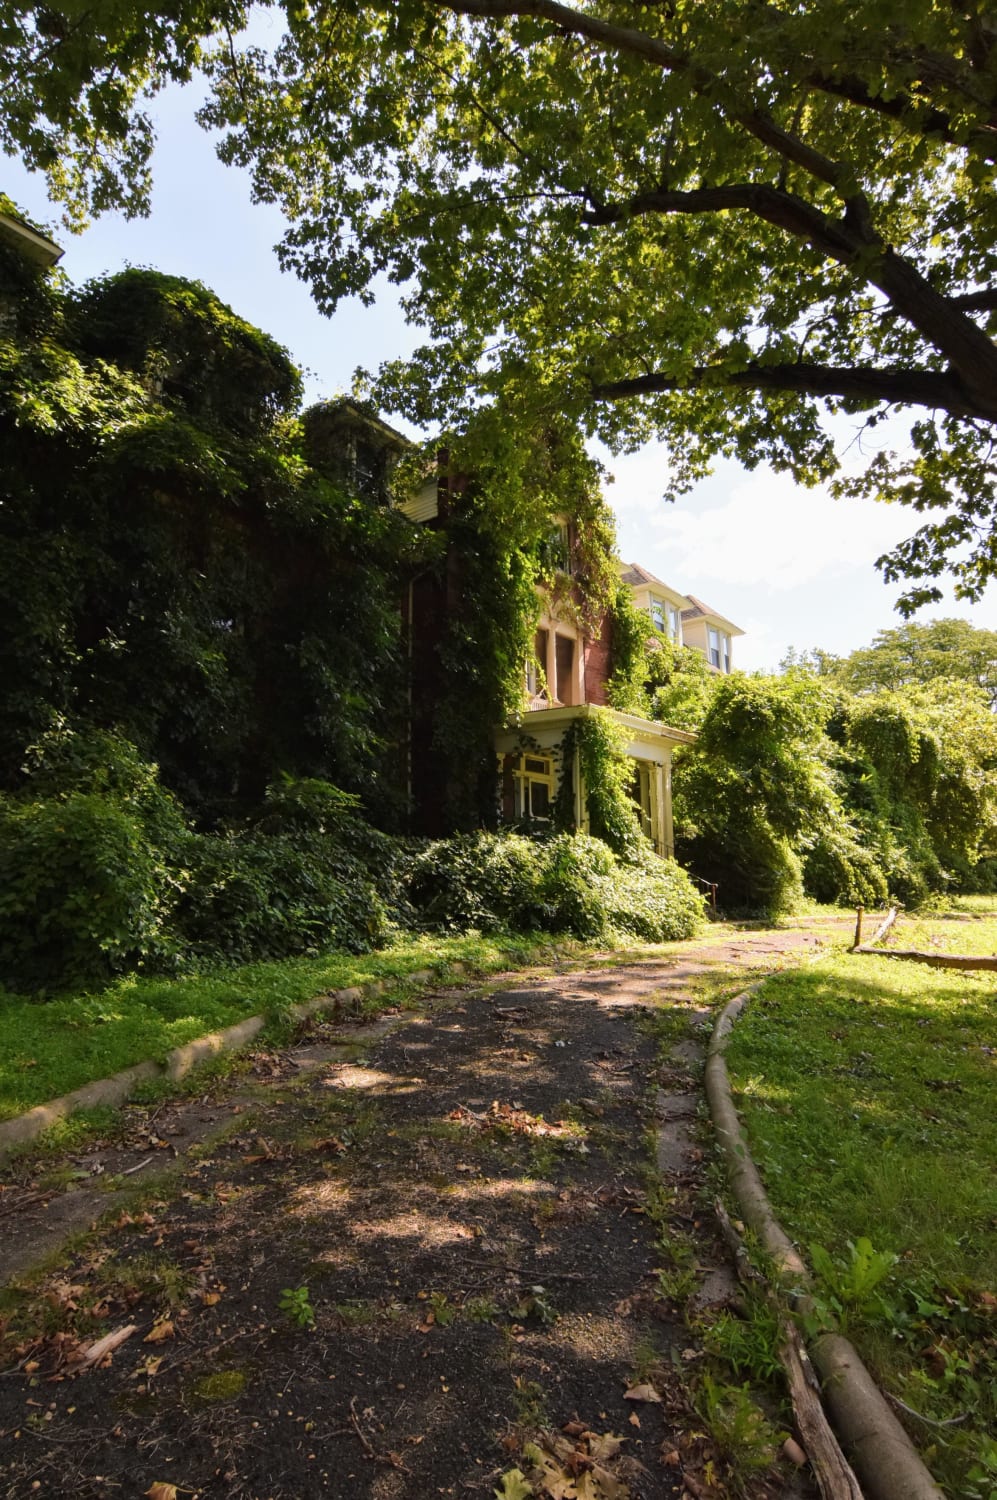 This abandoned nursing home has been overtaken by ivy.